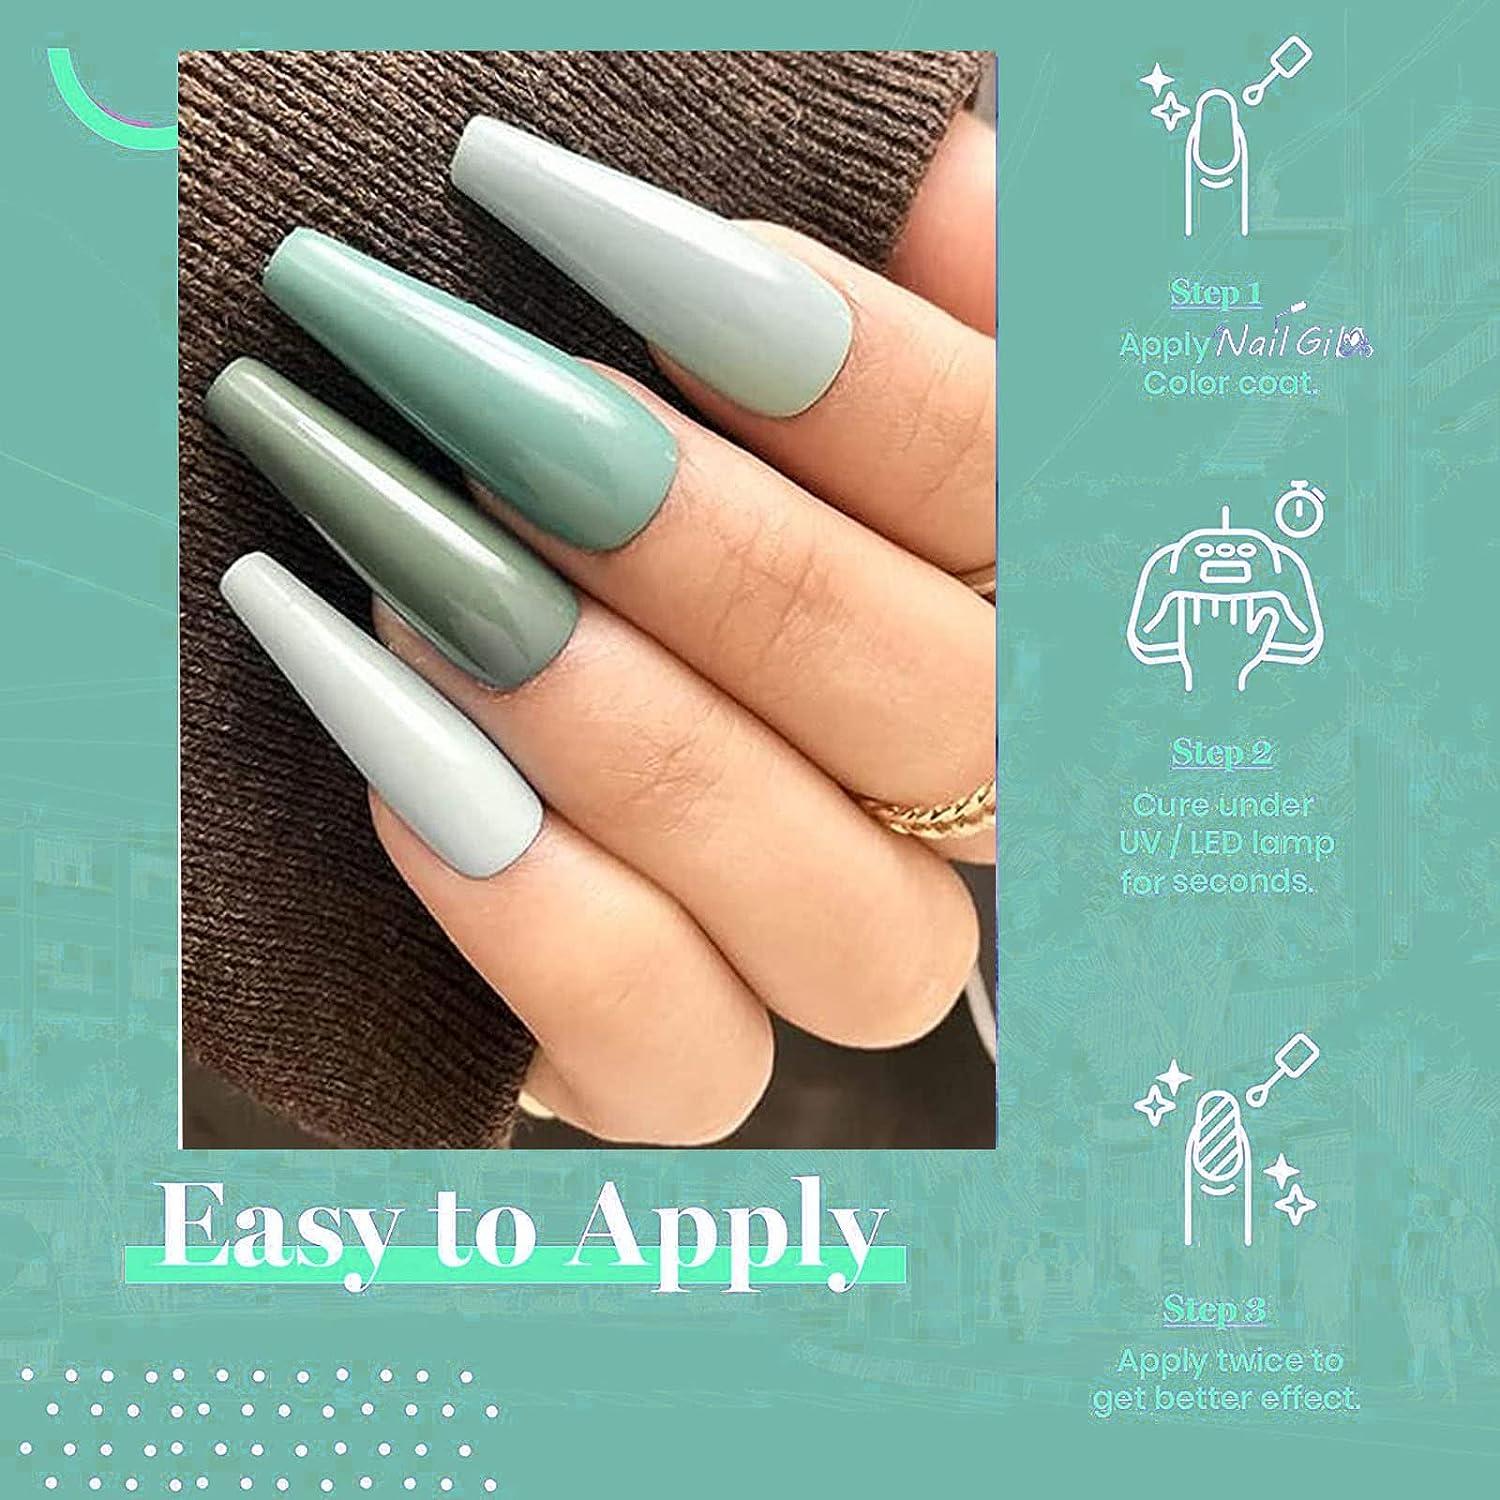 40 Great Nail Art Ideas- Teal - Adventures In Acetone